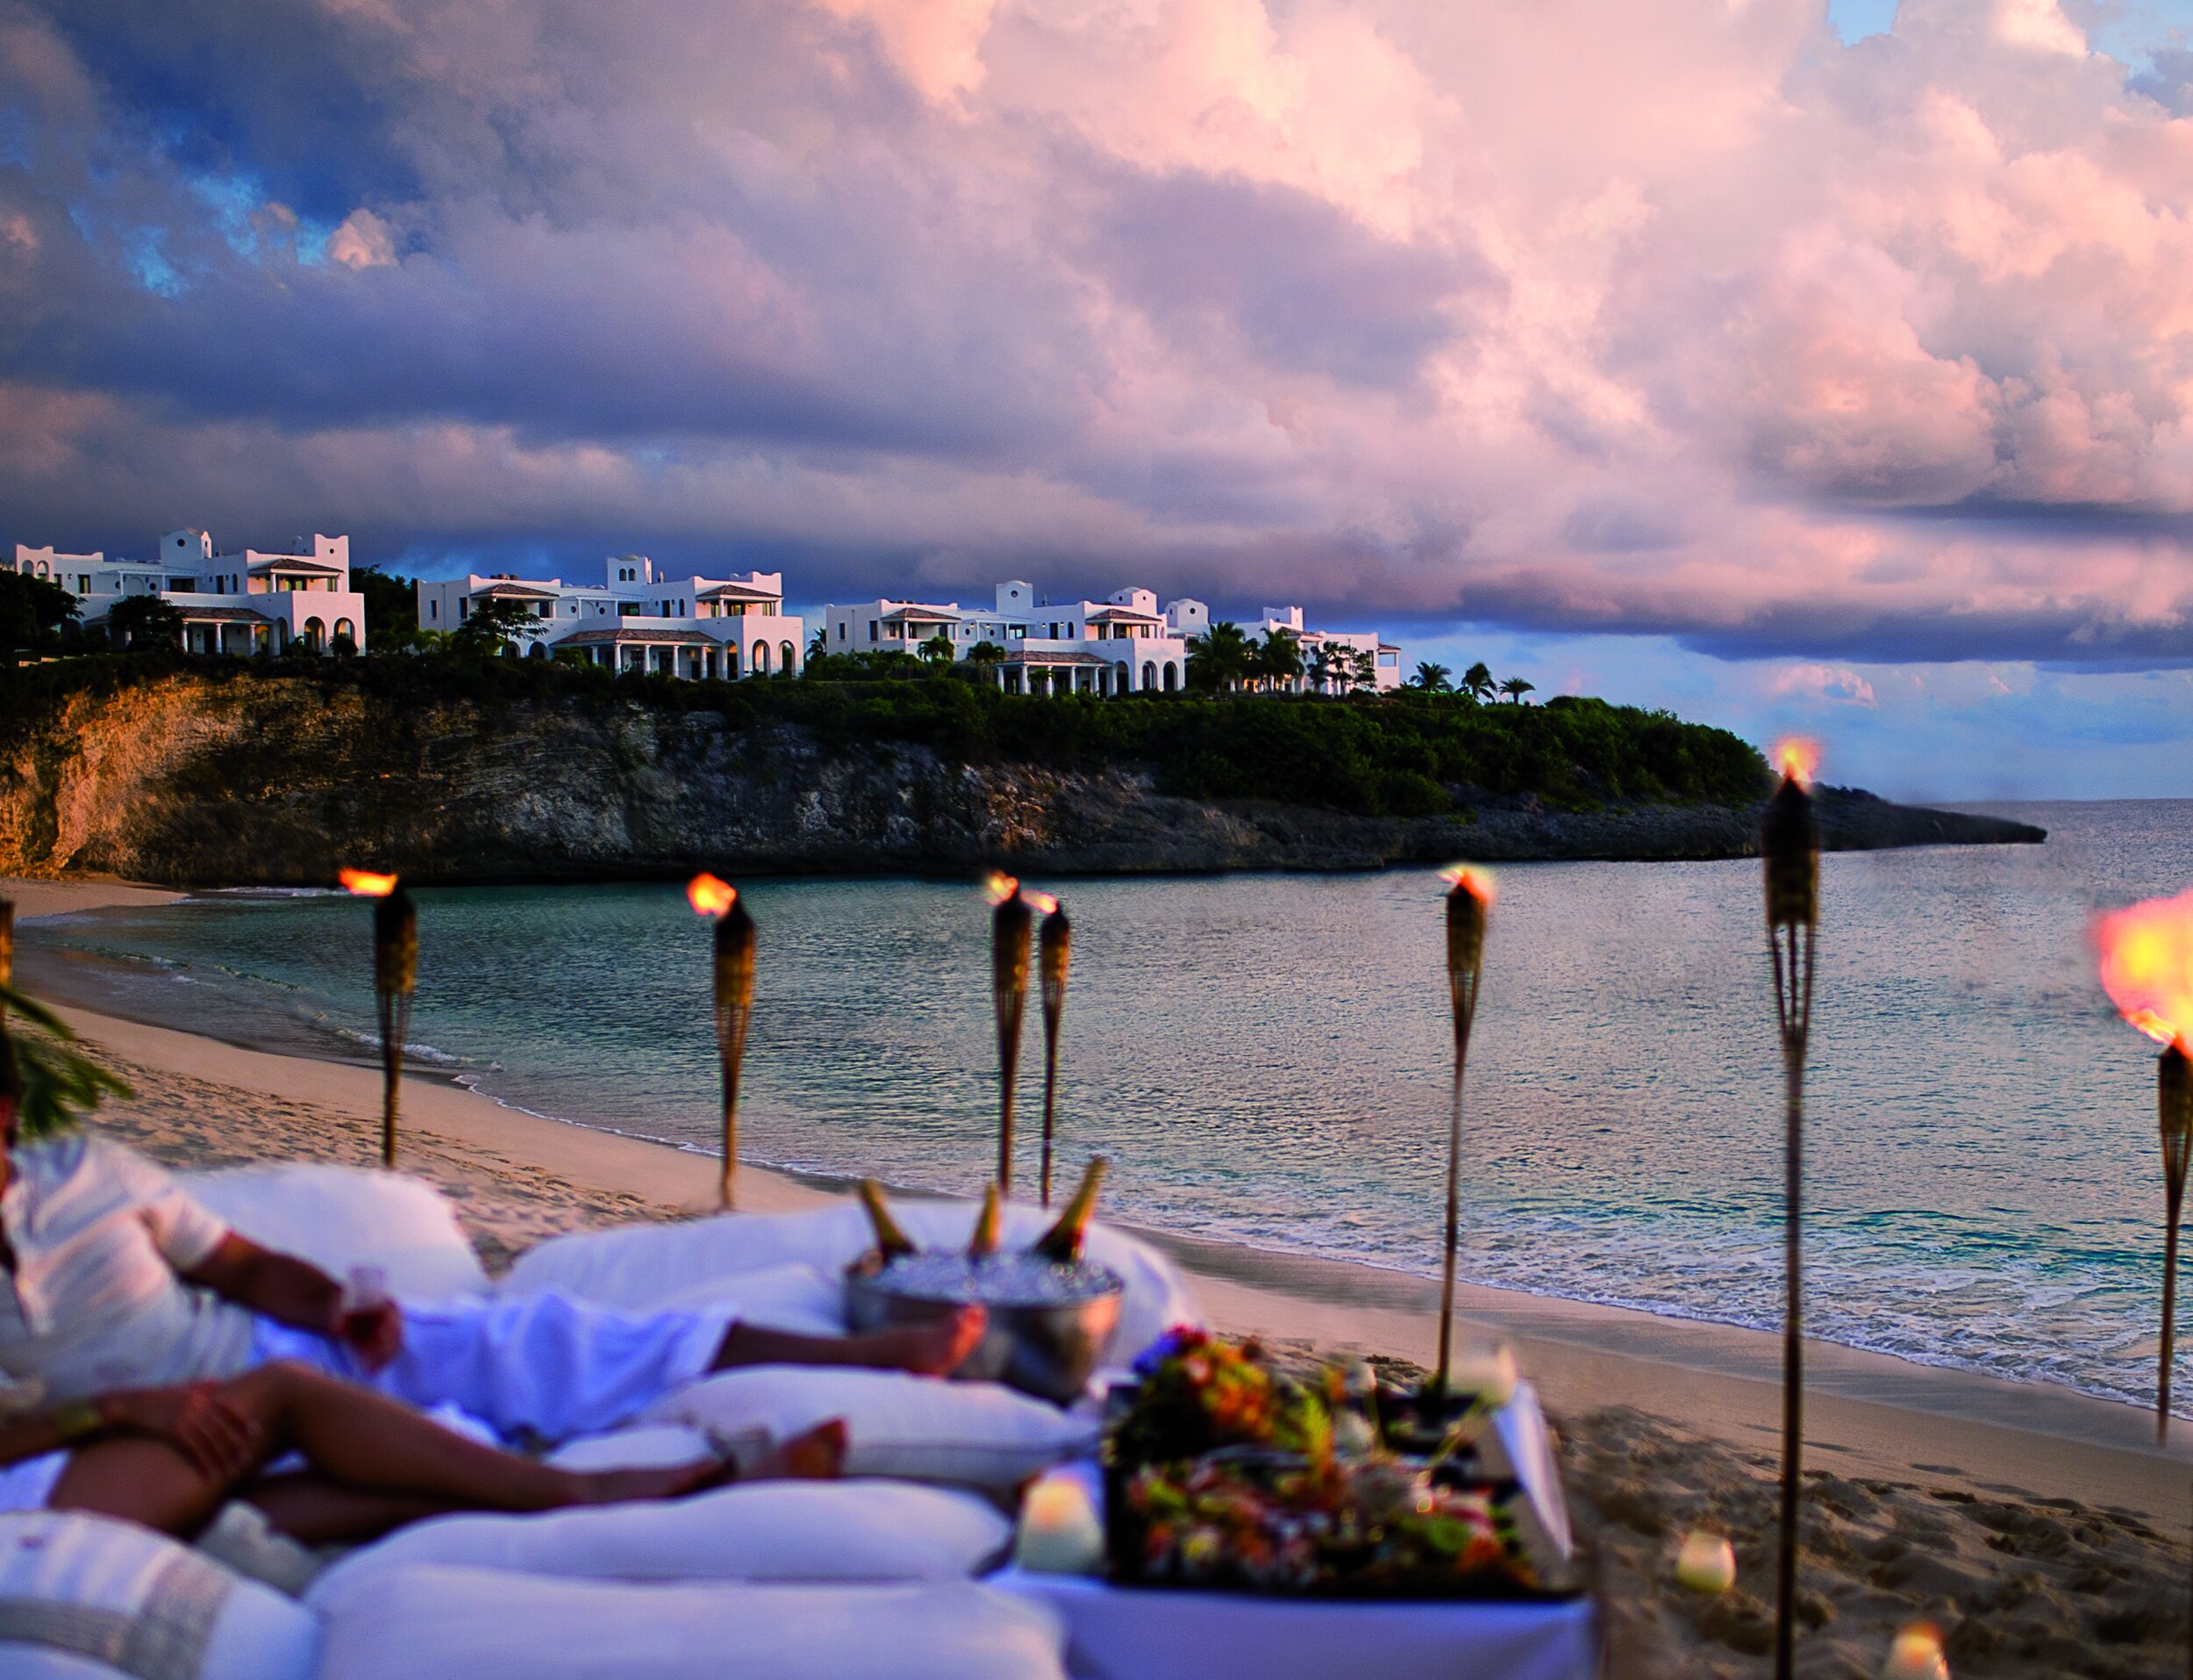   Private dining on the beach, with the villas in the background (photo credit: Belmond)  